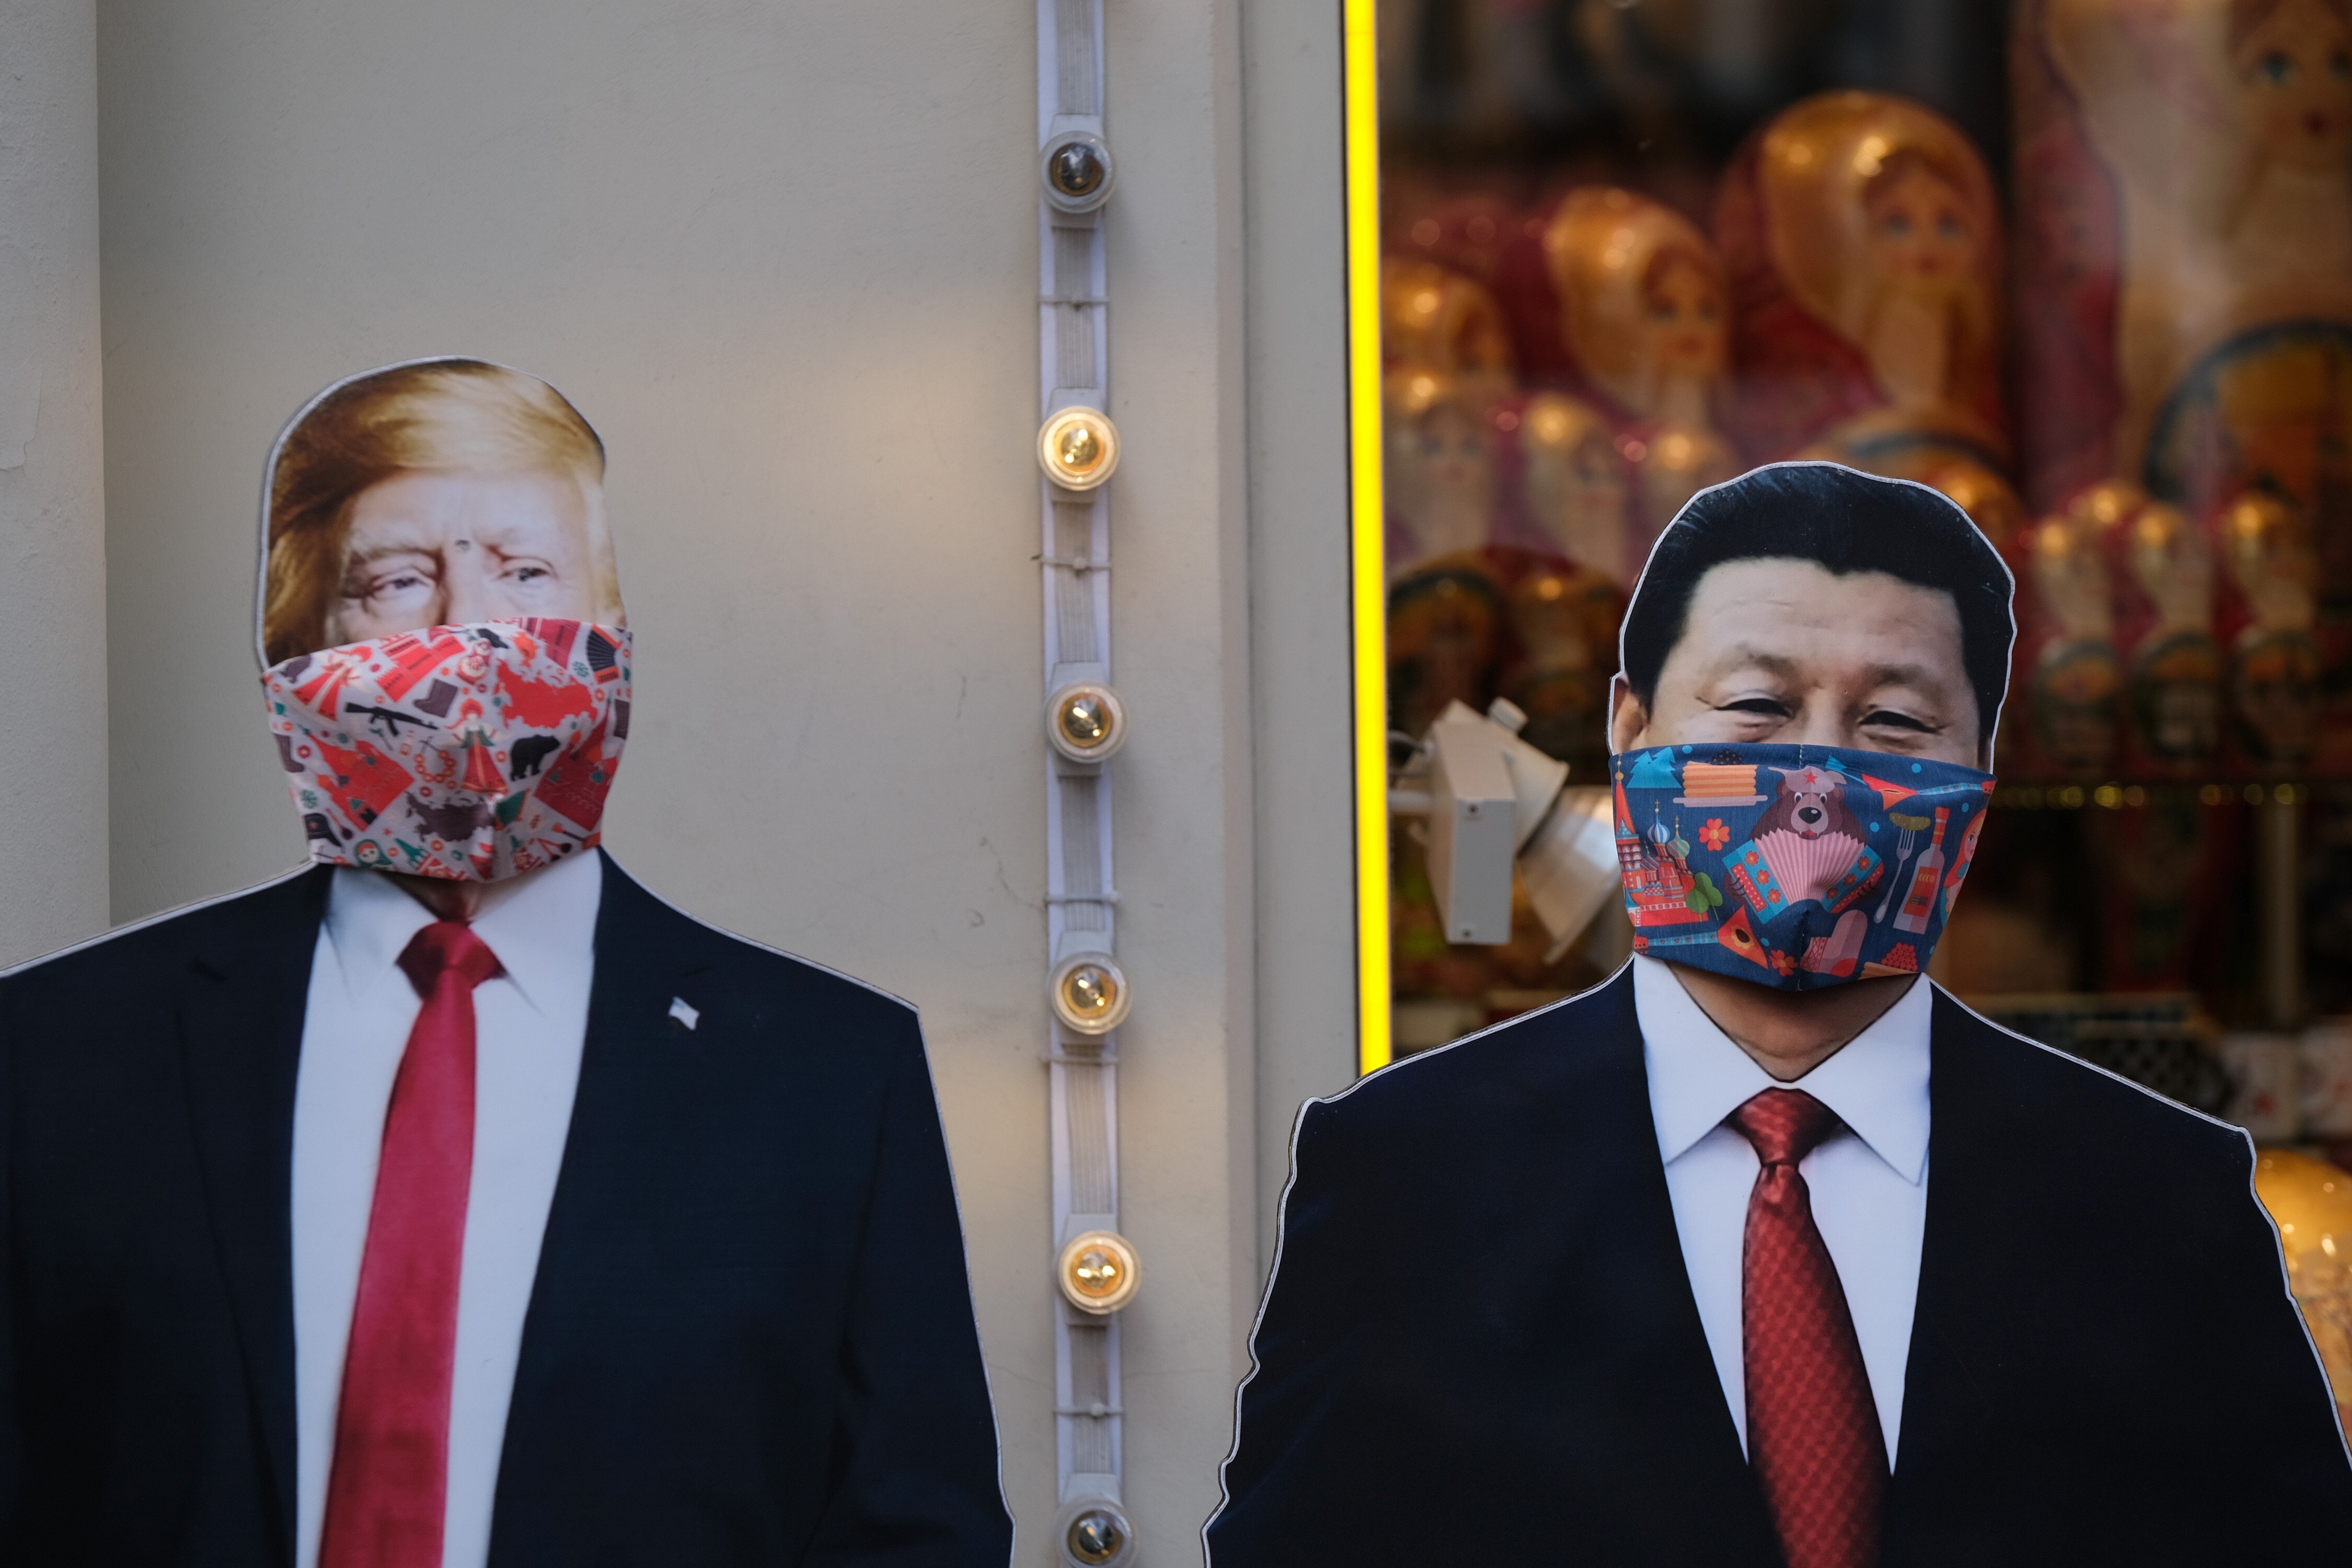 Cardboard cut-outs of US President Donald Trump and Chinese President Xi Jinping near a gift shop in Moscow. Photo: Reuters